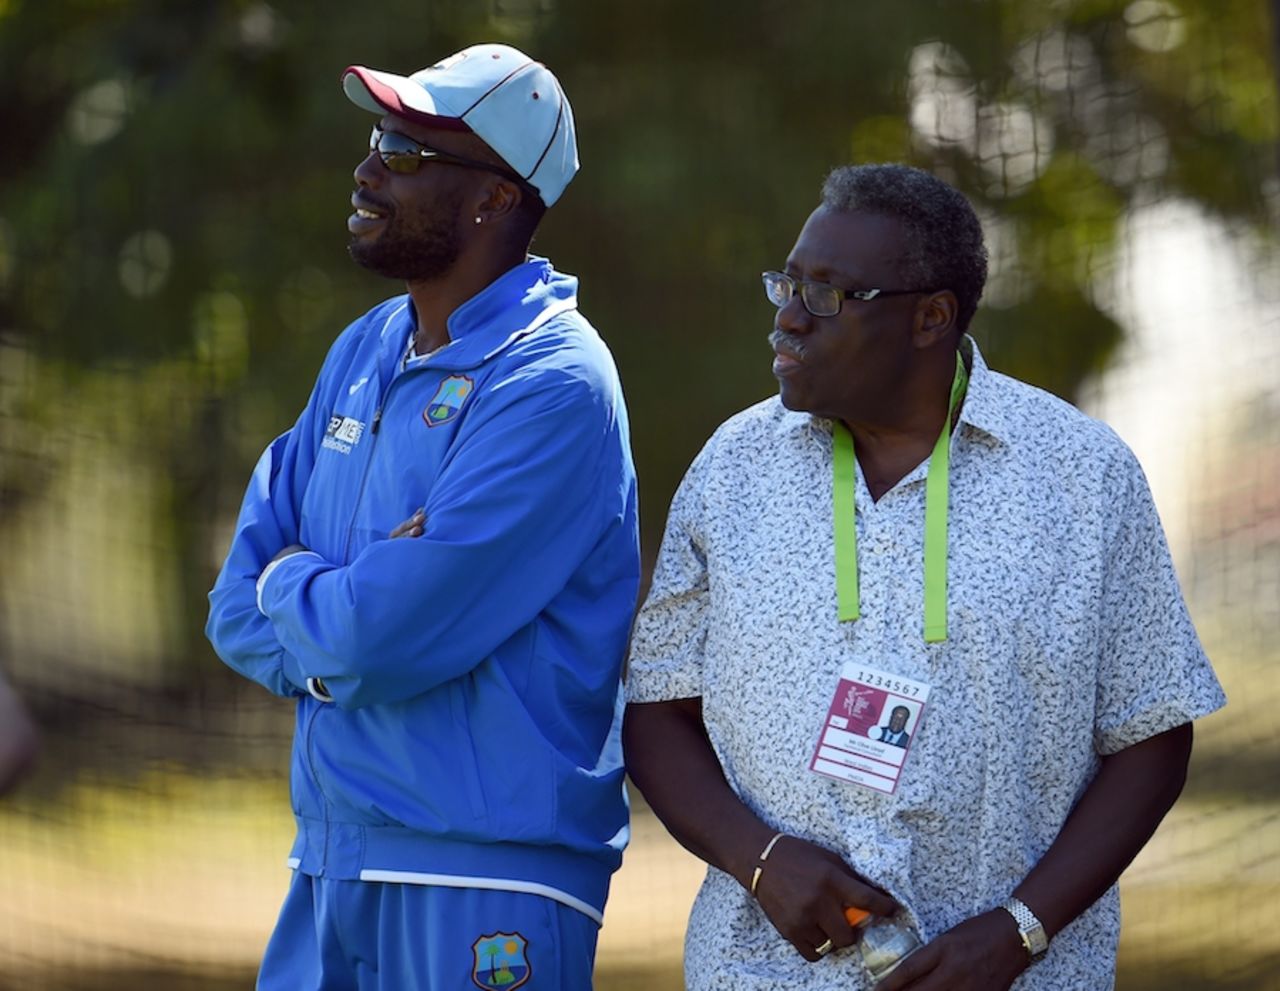 Curtly Ambrose and Clive Lloyd watch the West Indies team practice, World Cup, Christchurch, February 20, 2015